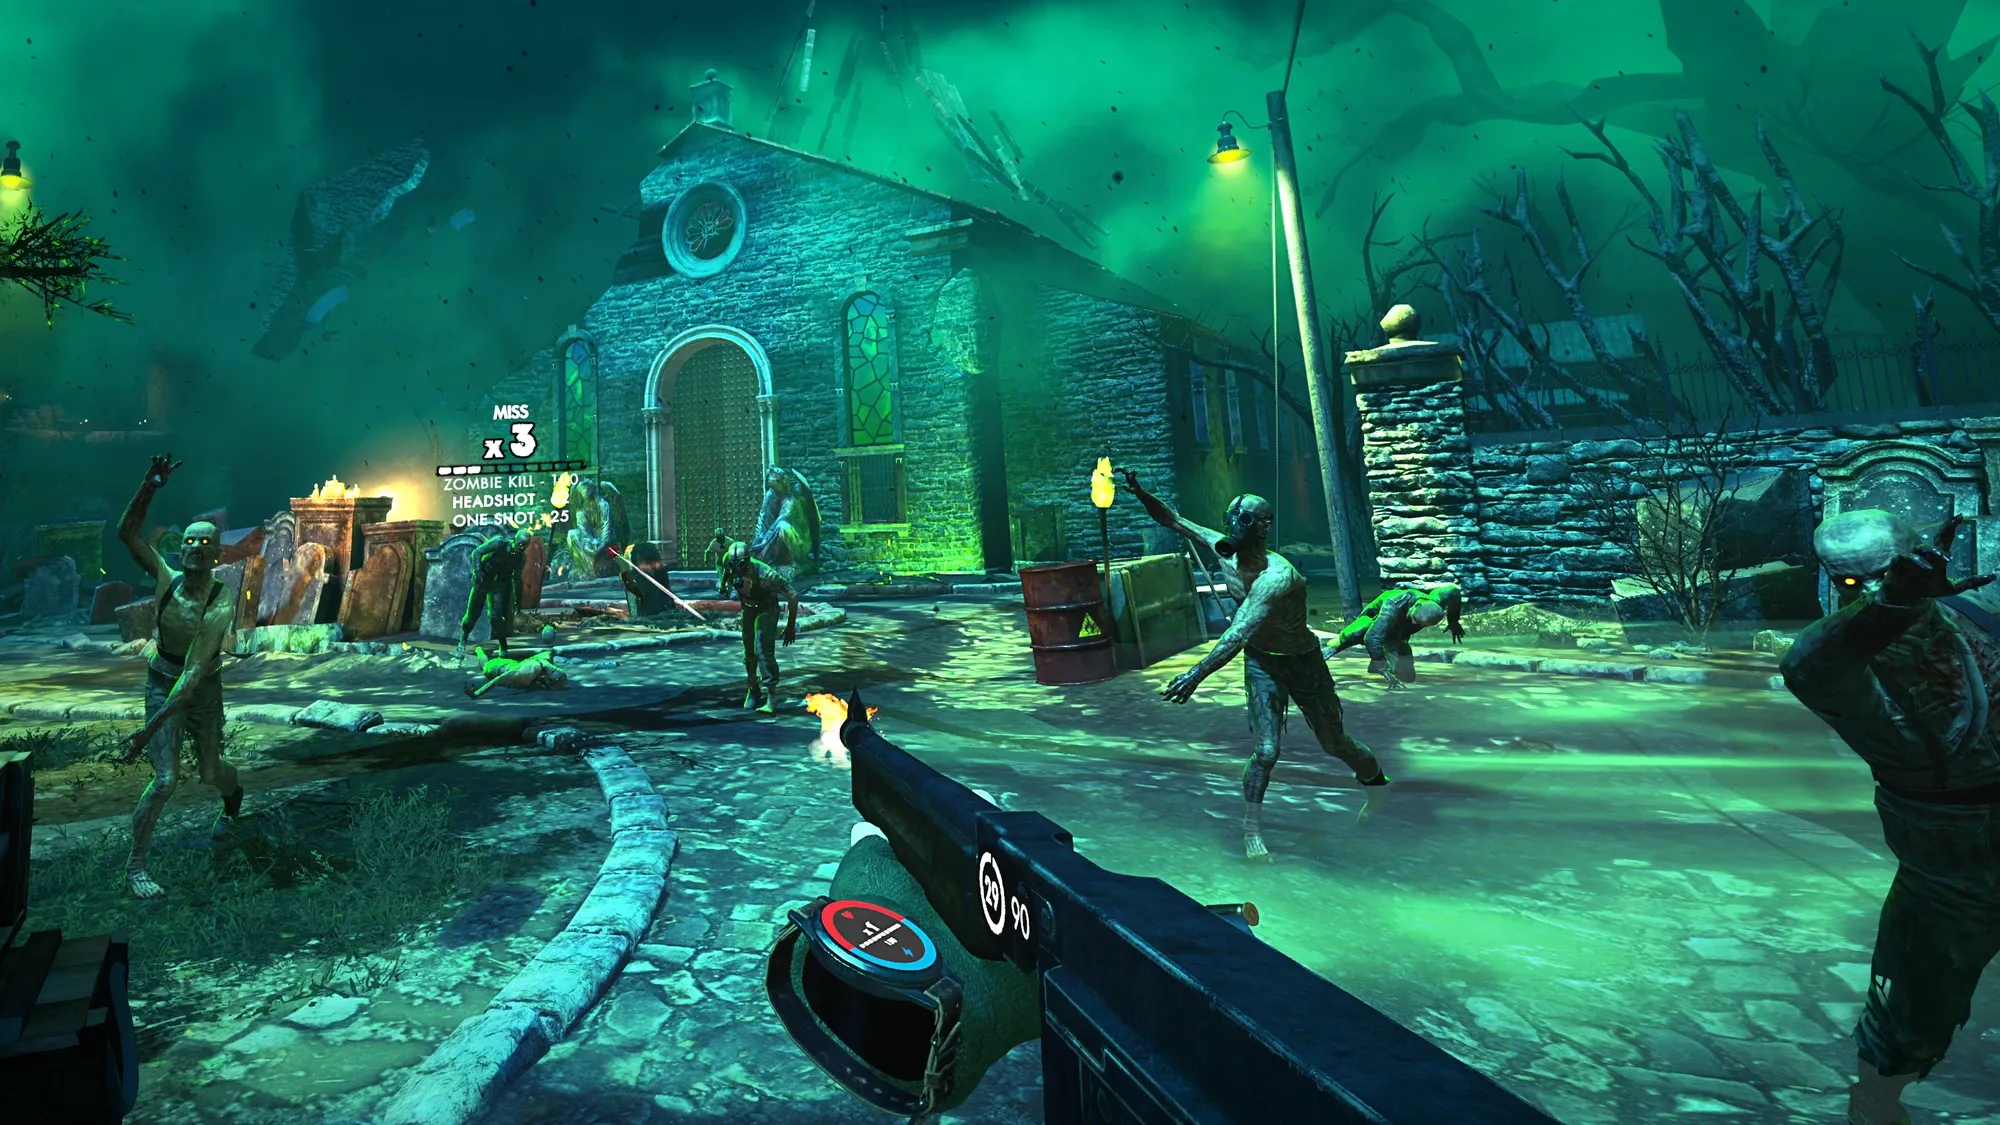 Zombie Army VR Screenshot zombie attacking church